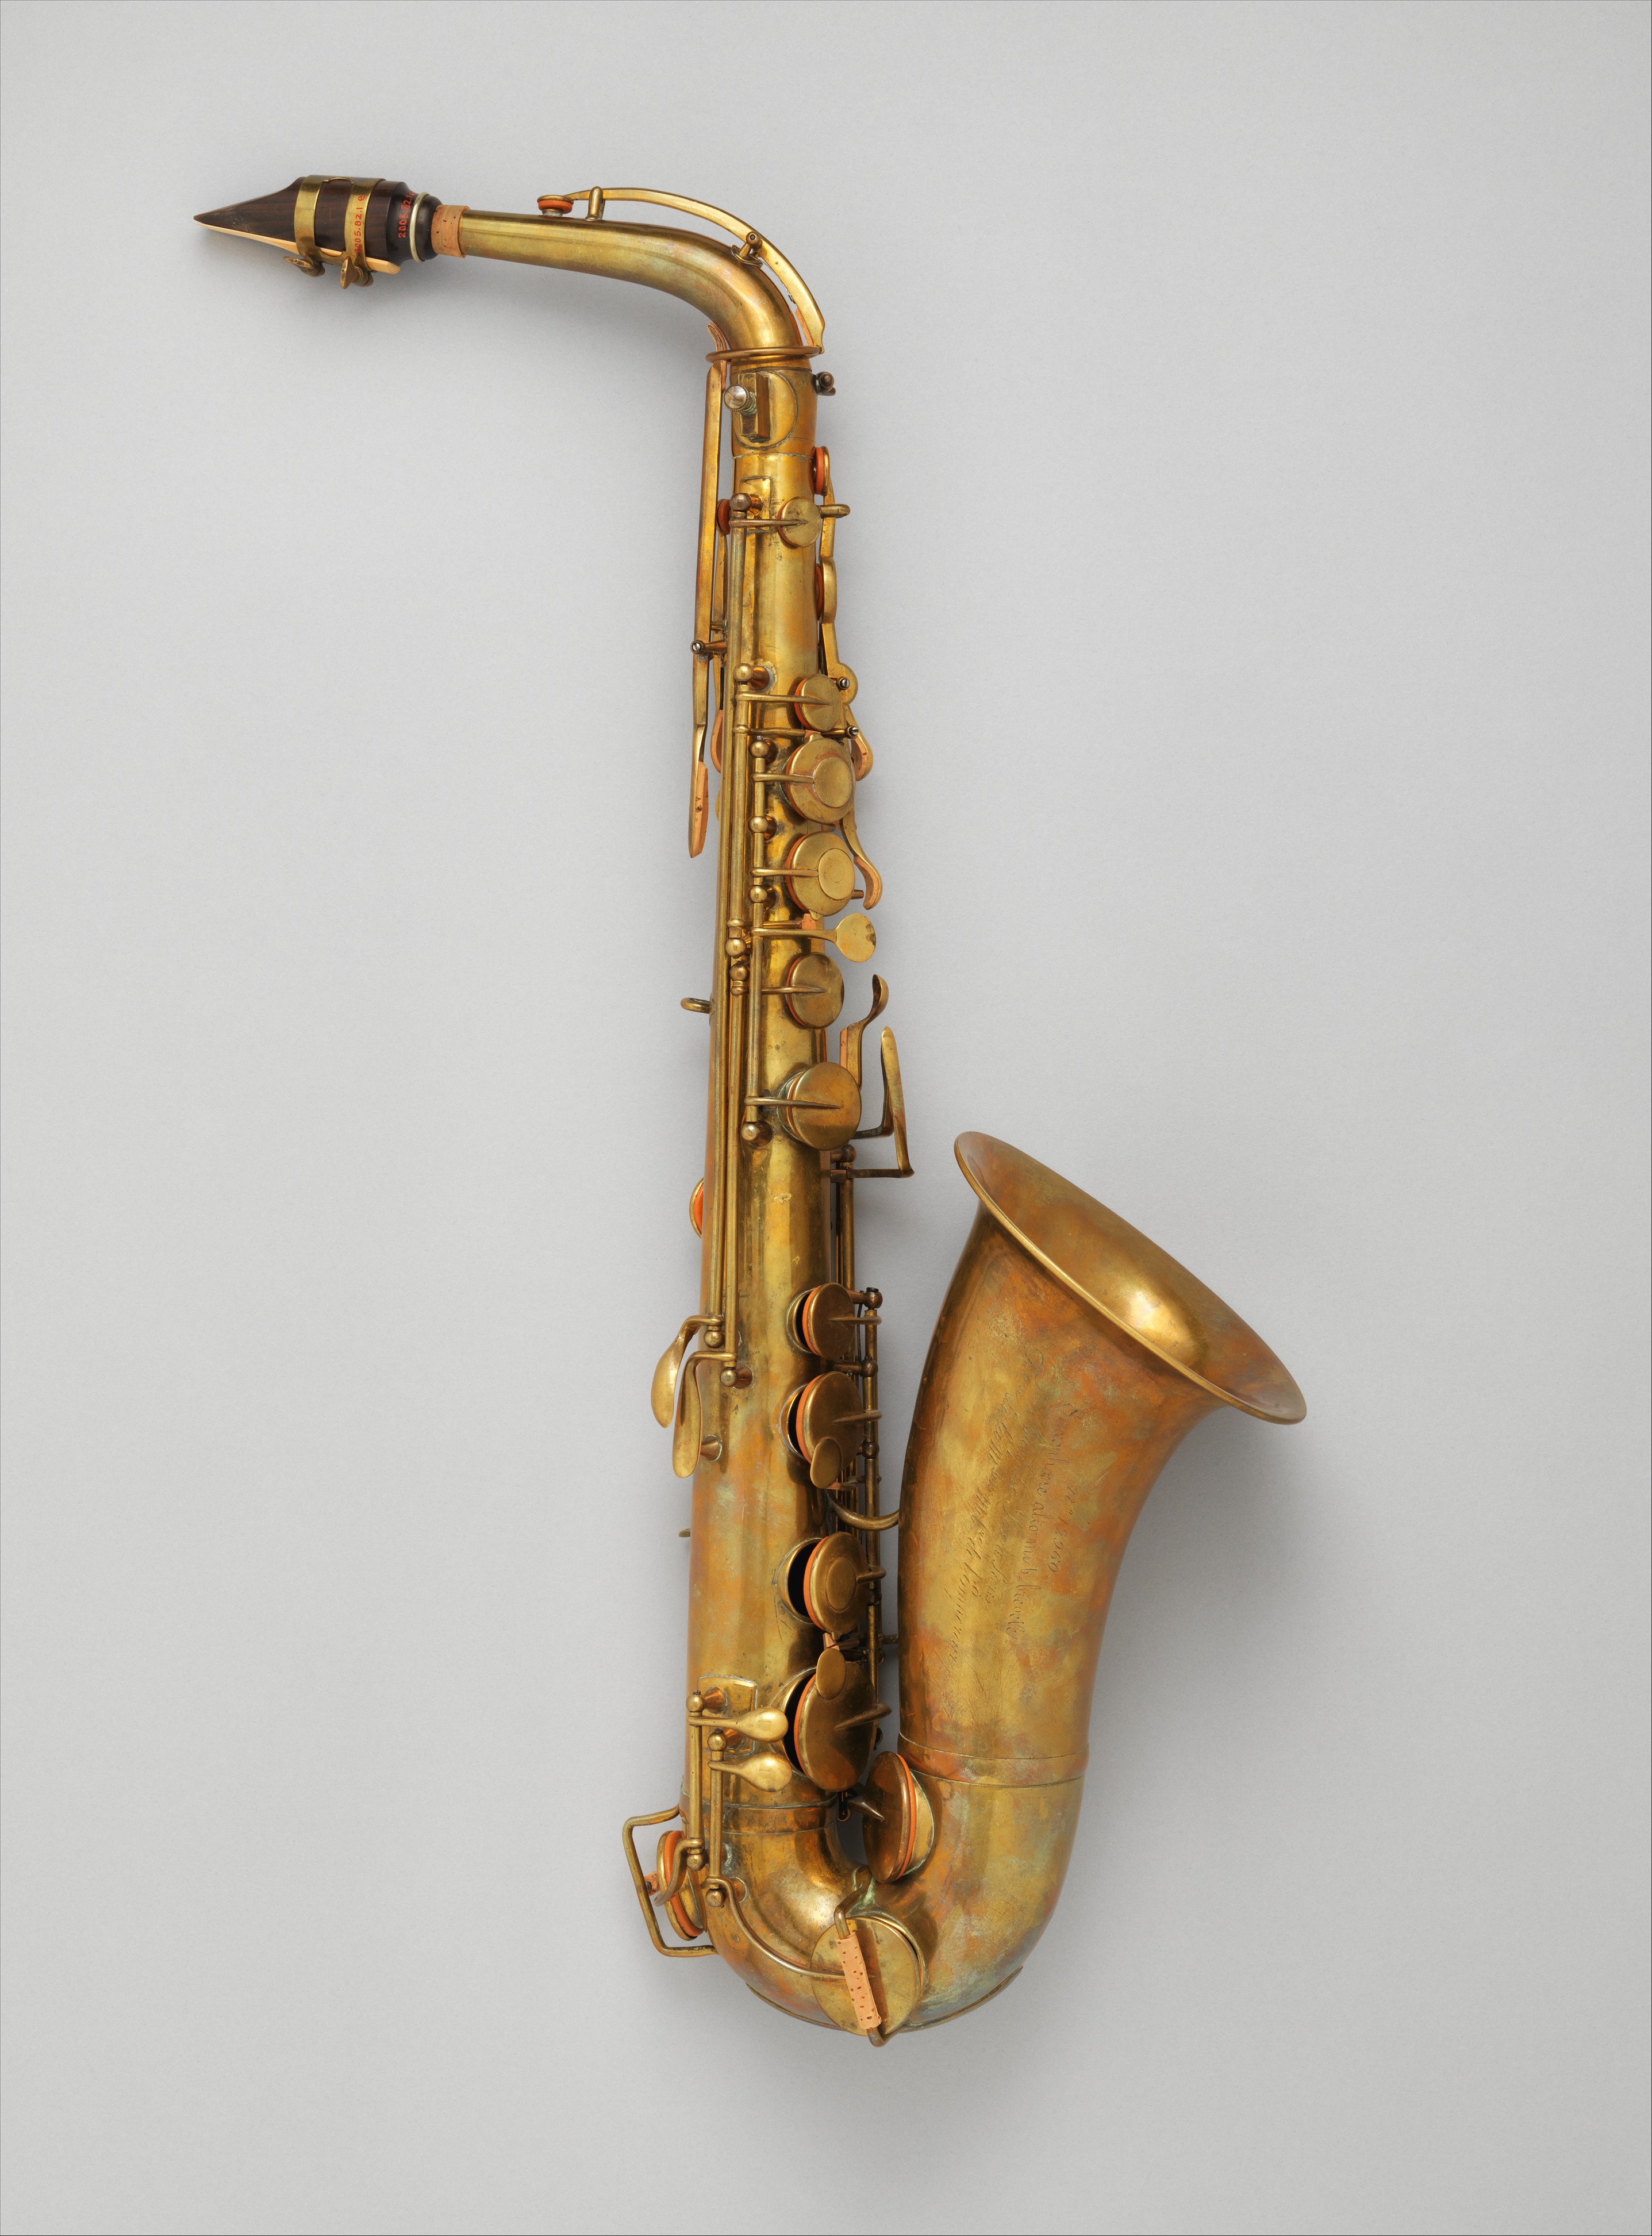 The joy of Adolphe Sax: a major exhibition brings together rare